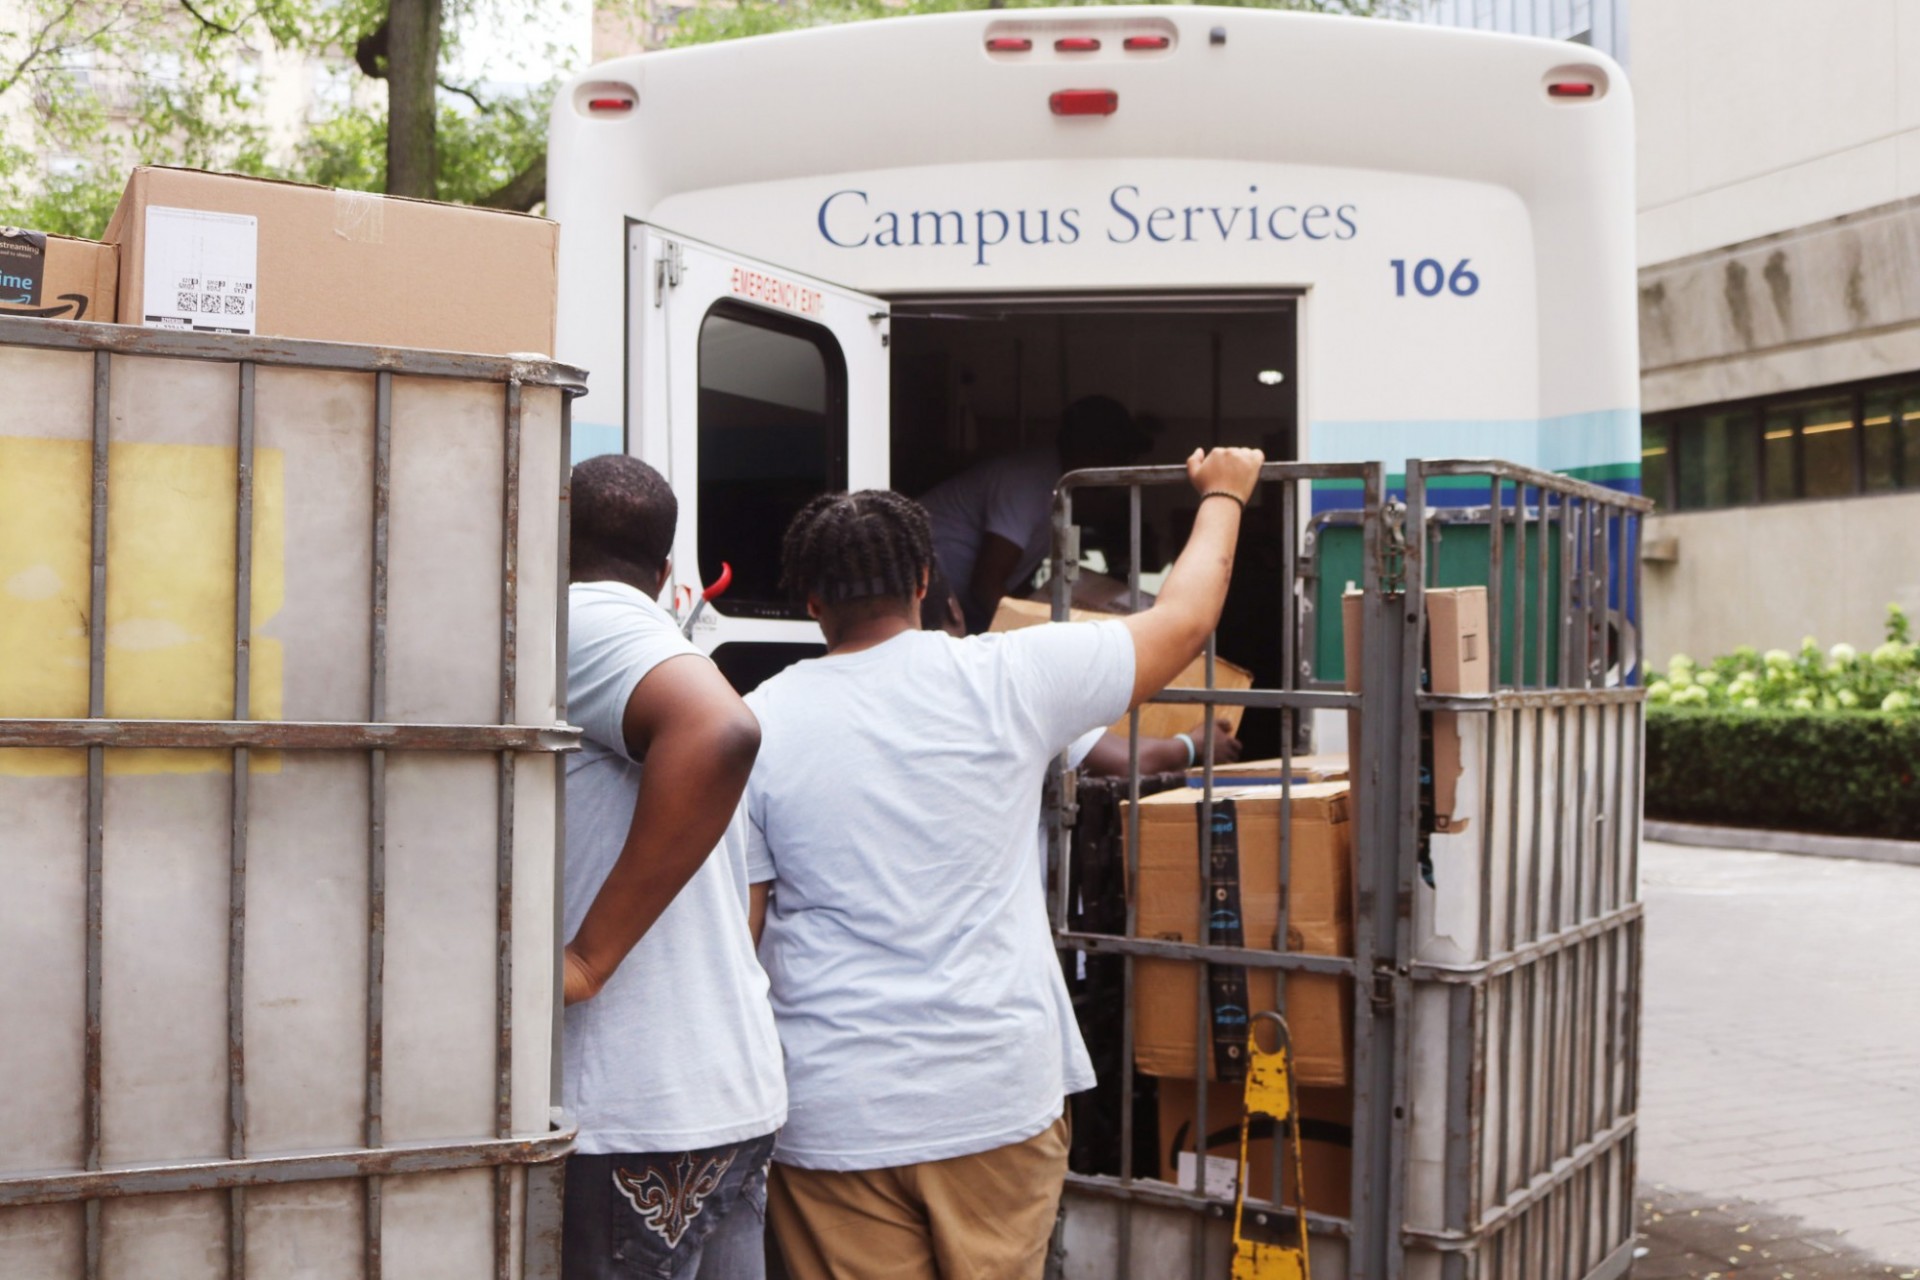 Employees unloading packages from Campus Services vehicle